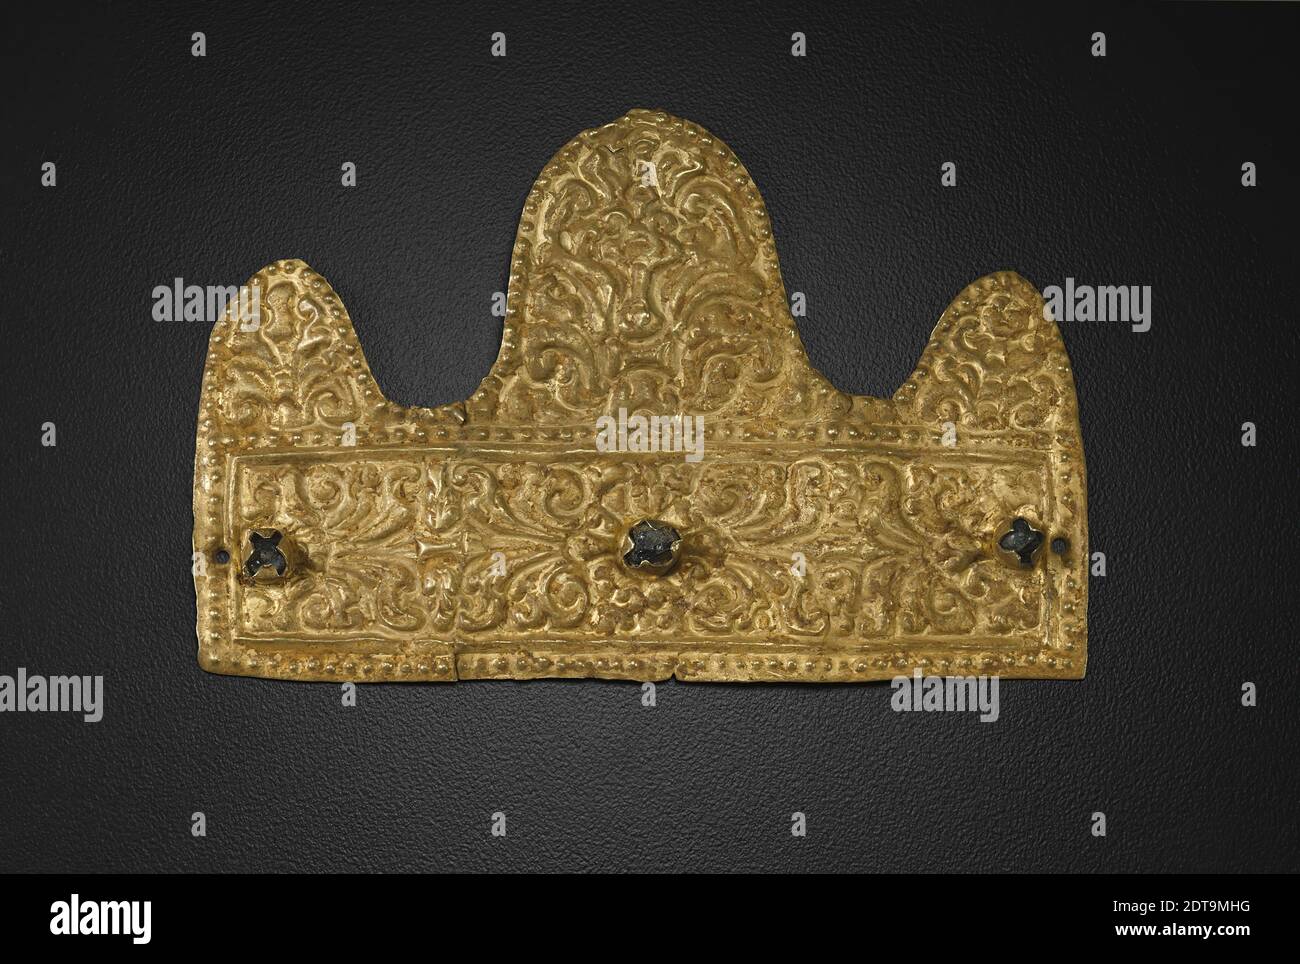 Pectoral with Gems, mid 8th–9th century, Gold and green translucent stone, 6.85 × 10.515 cm, 23.276 g, 0.085 cm (2 11/16 × 4 1/8 in., 23.276 g, 1/16 in.), Made in Java, Indonesia, Java, Early Classic Period (650–1000), Jewelry Stock Photo